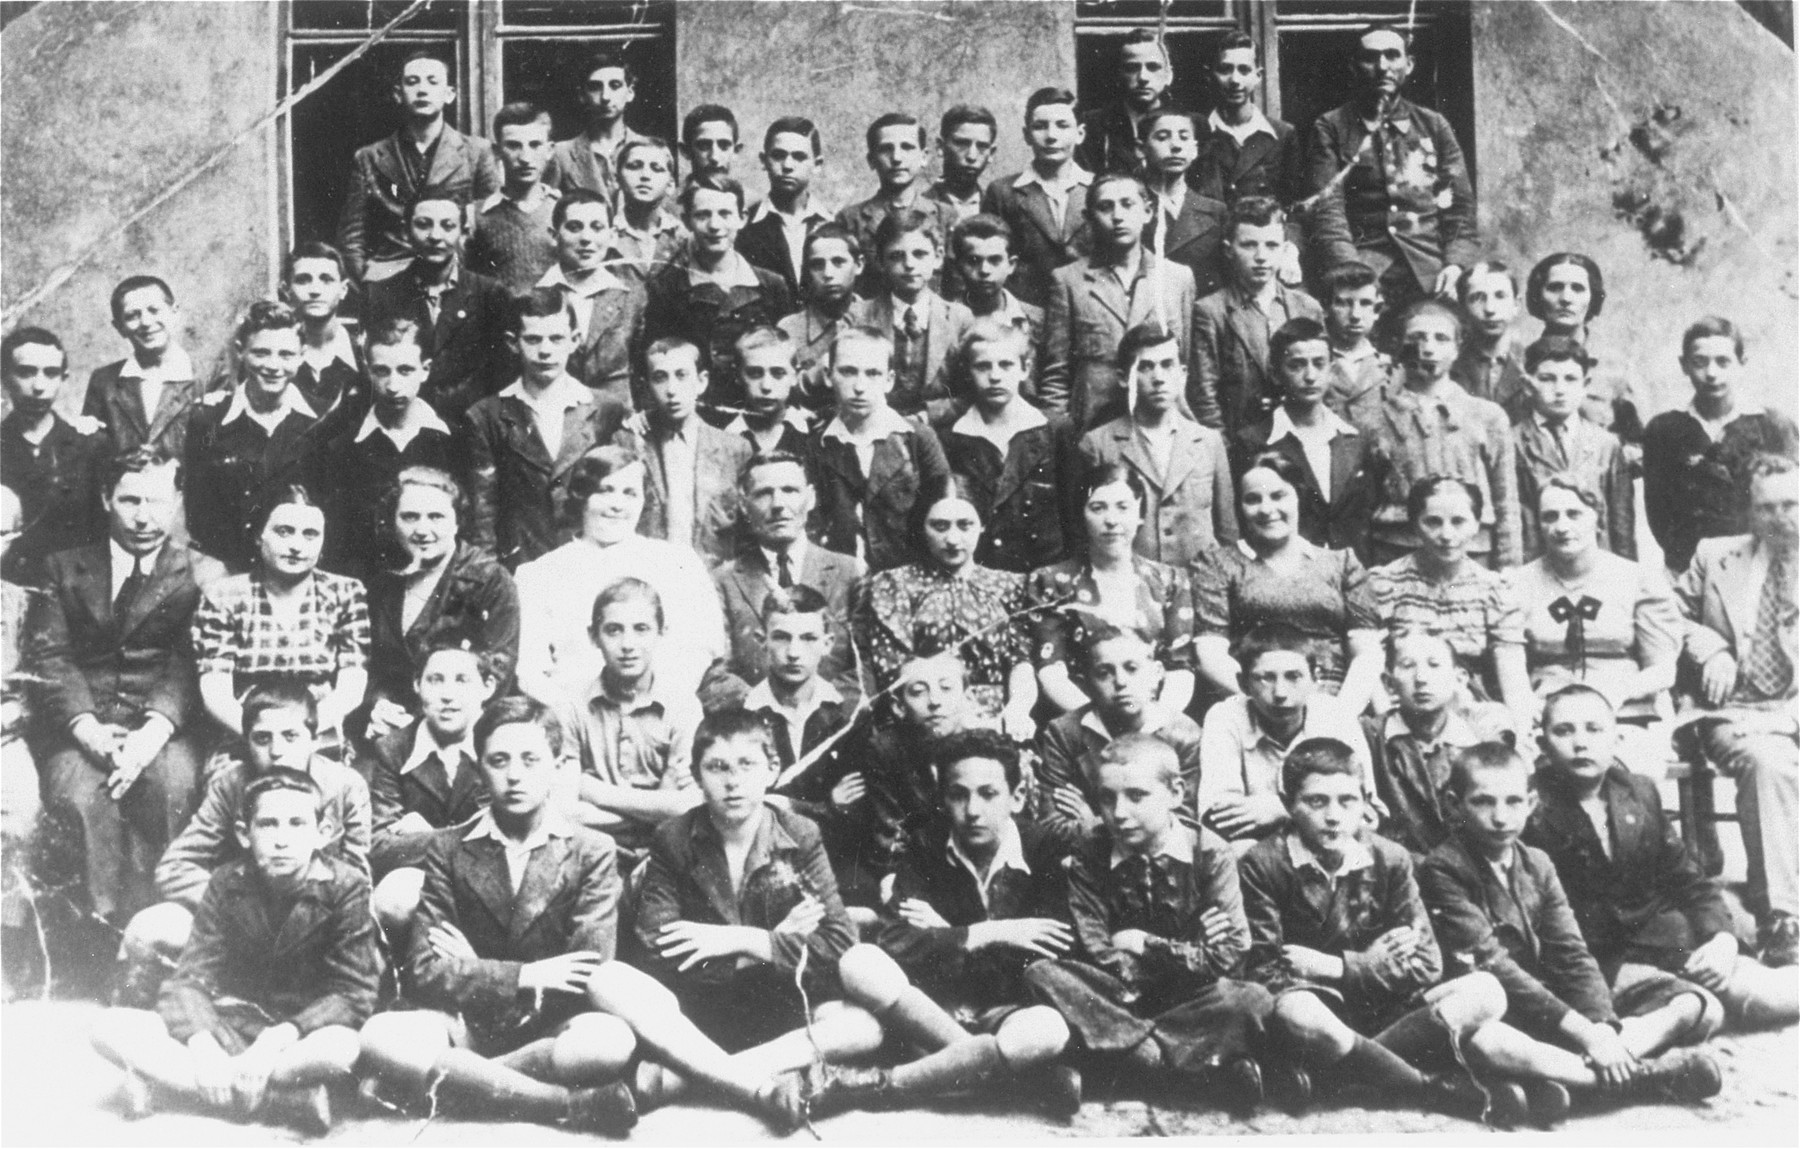 Group portrait of students in Class VII during their final semester at the Jewish public school no.121 (known as Konstadt) in Lodz.  

Among those pictured is Solly Perel (second row from the front, second from the left).